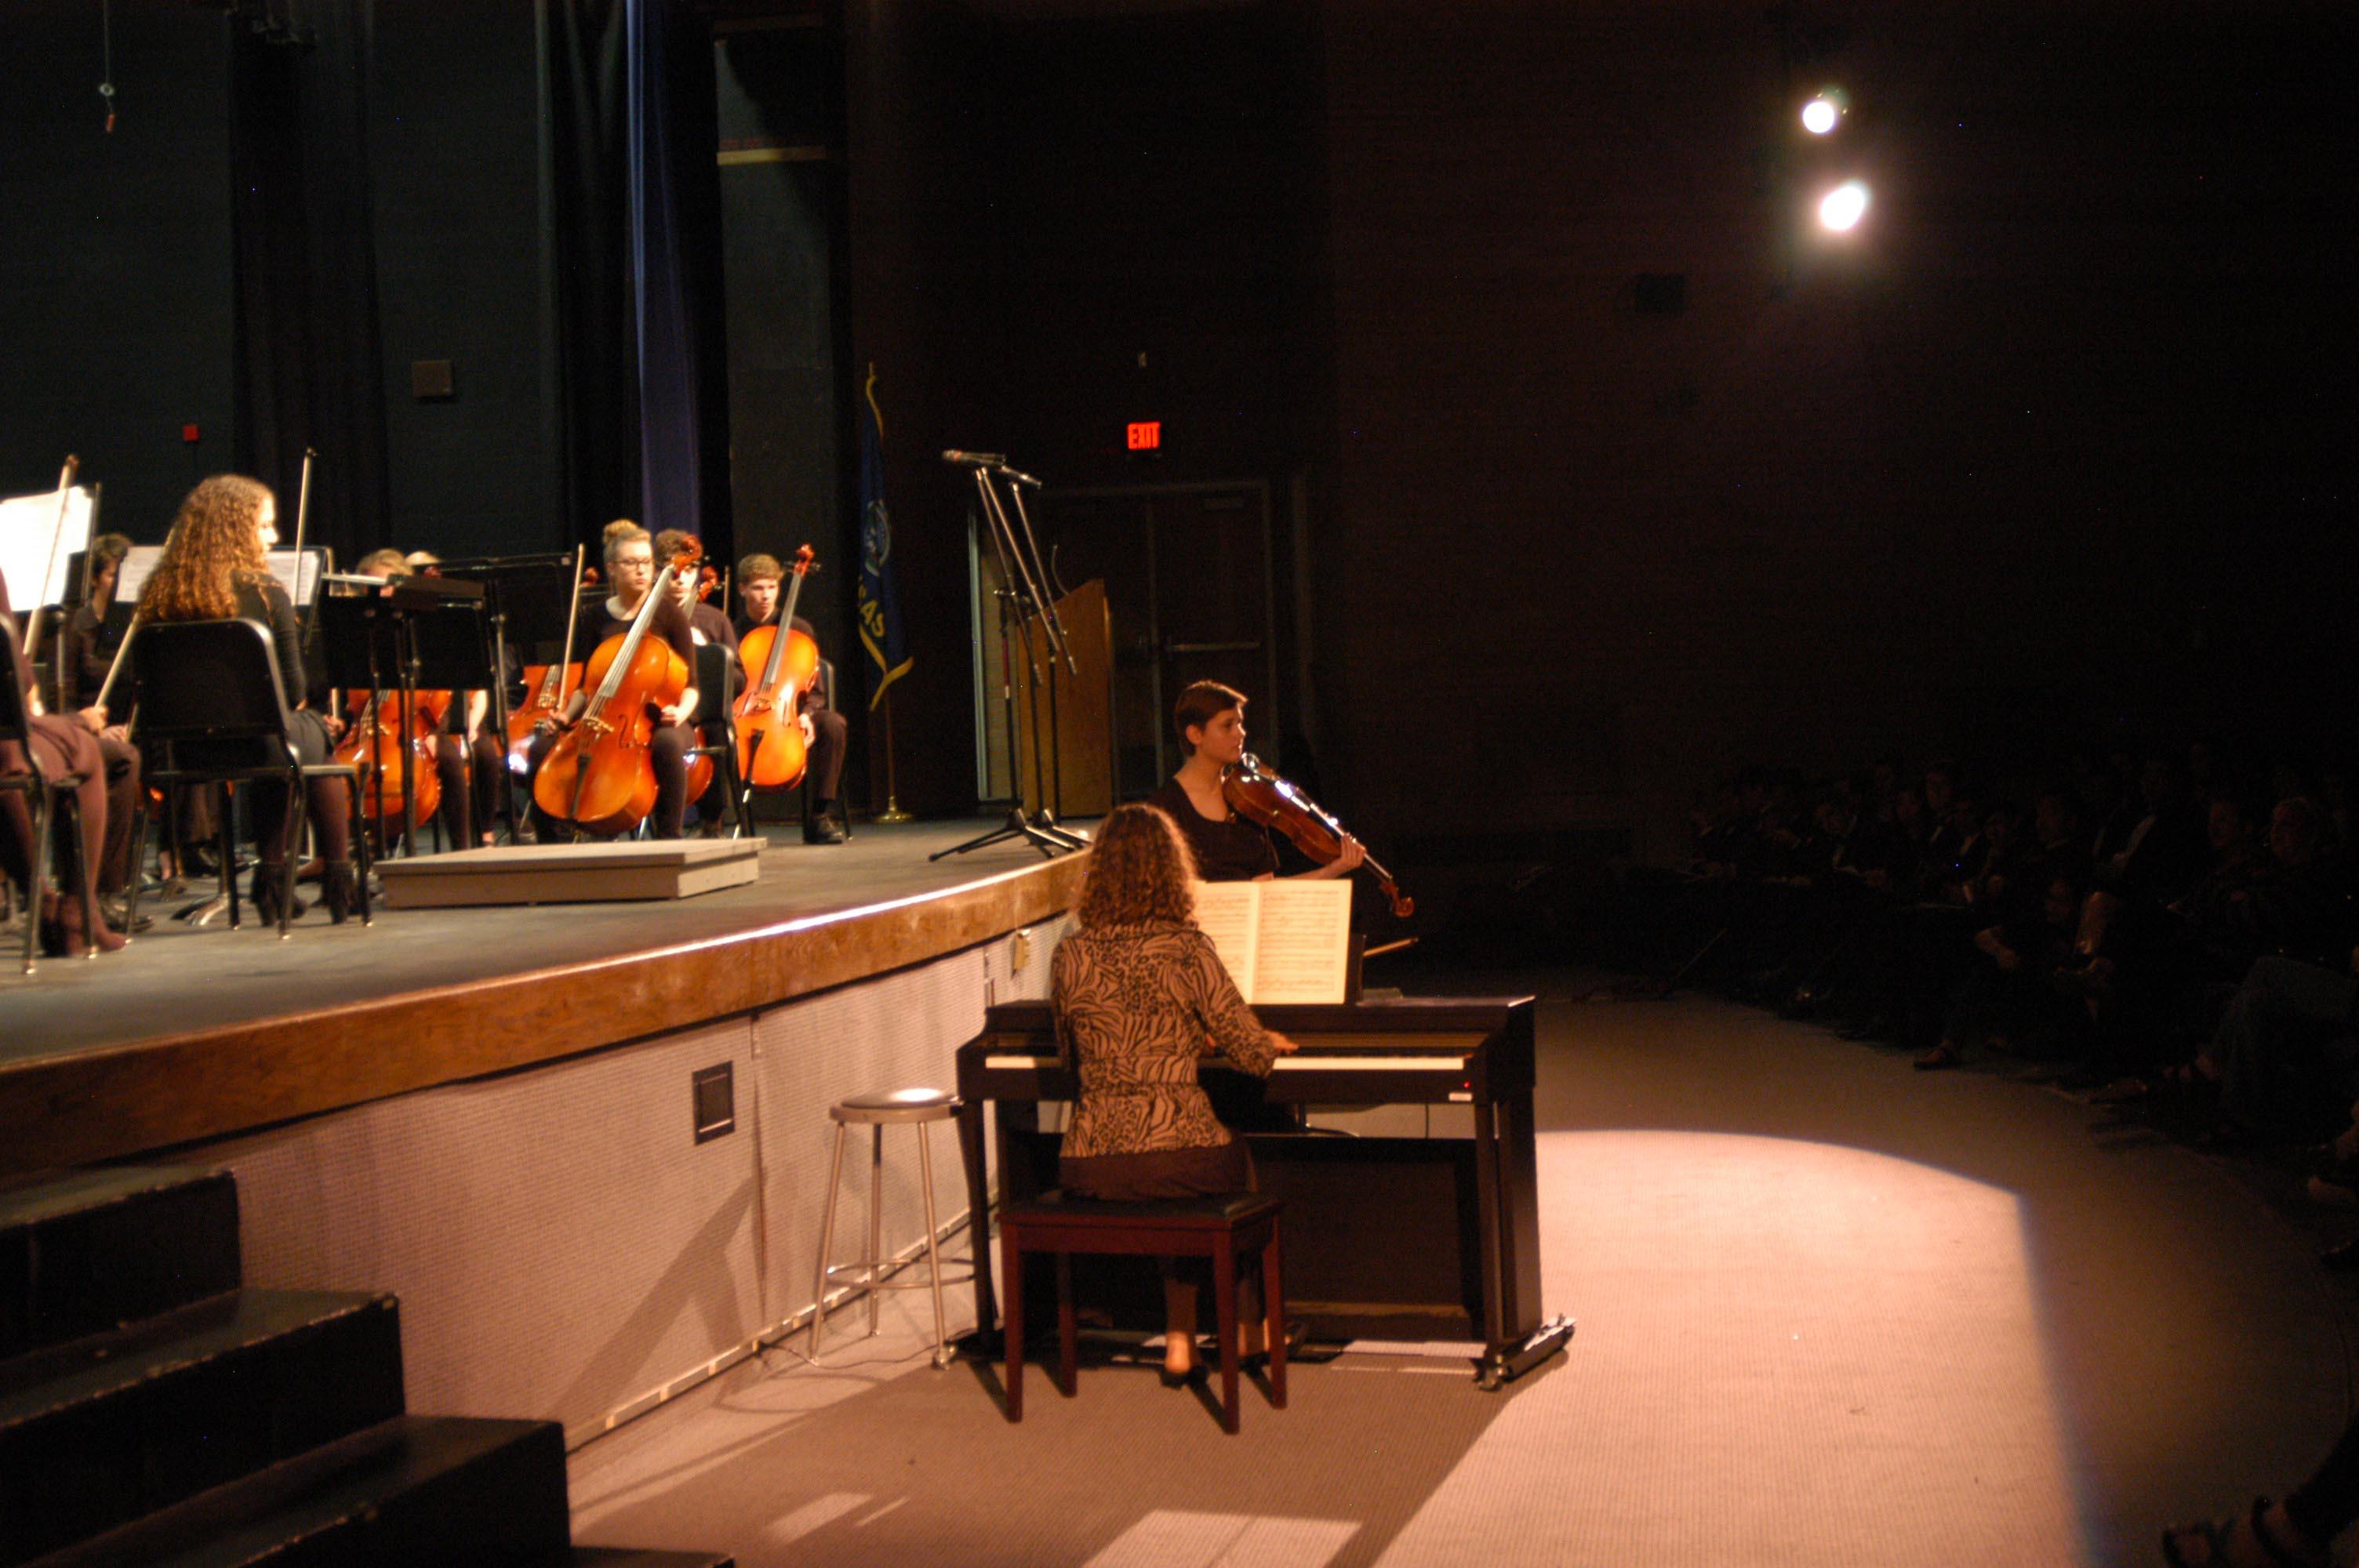 Final+orchestra+concert+tribute+to+seniors%2C+character-driven+performance